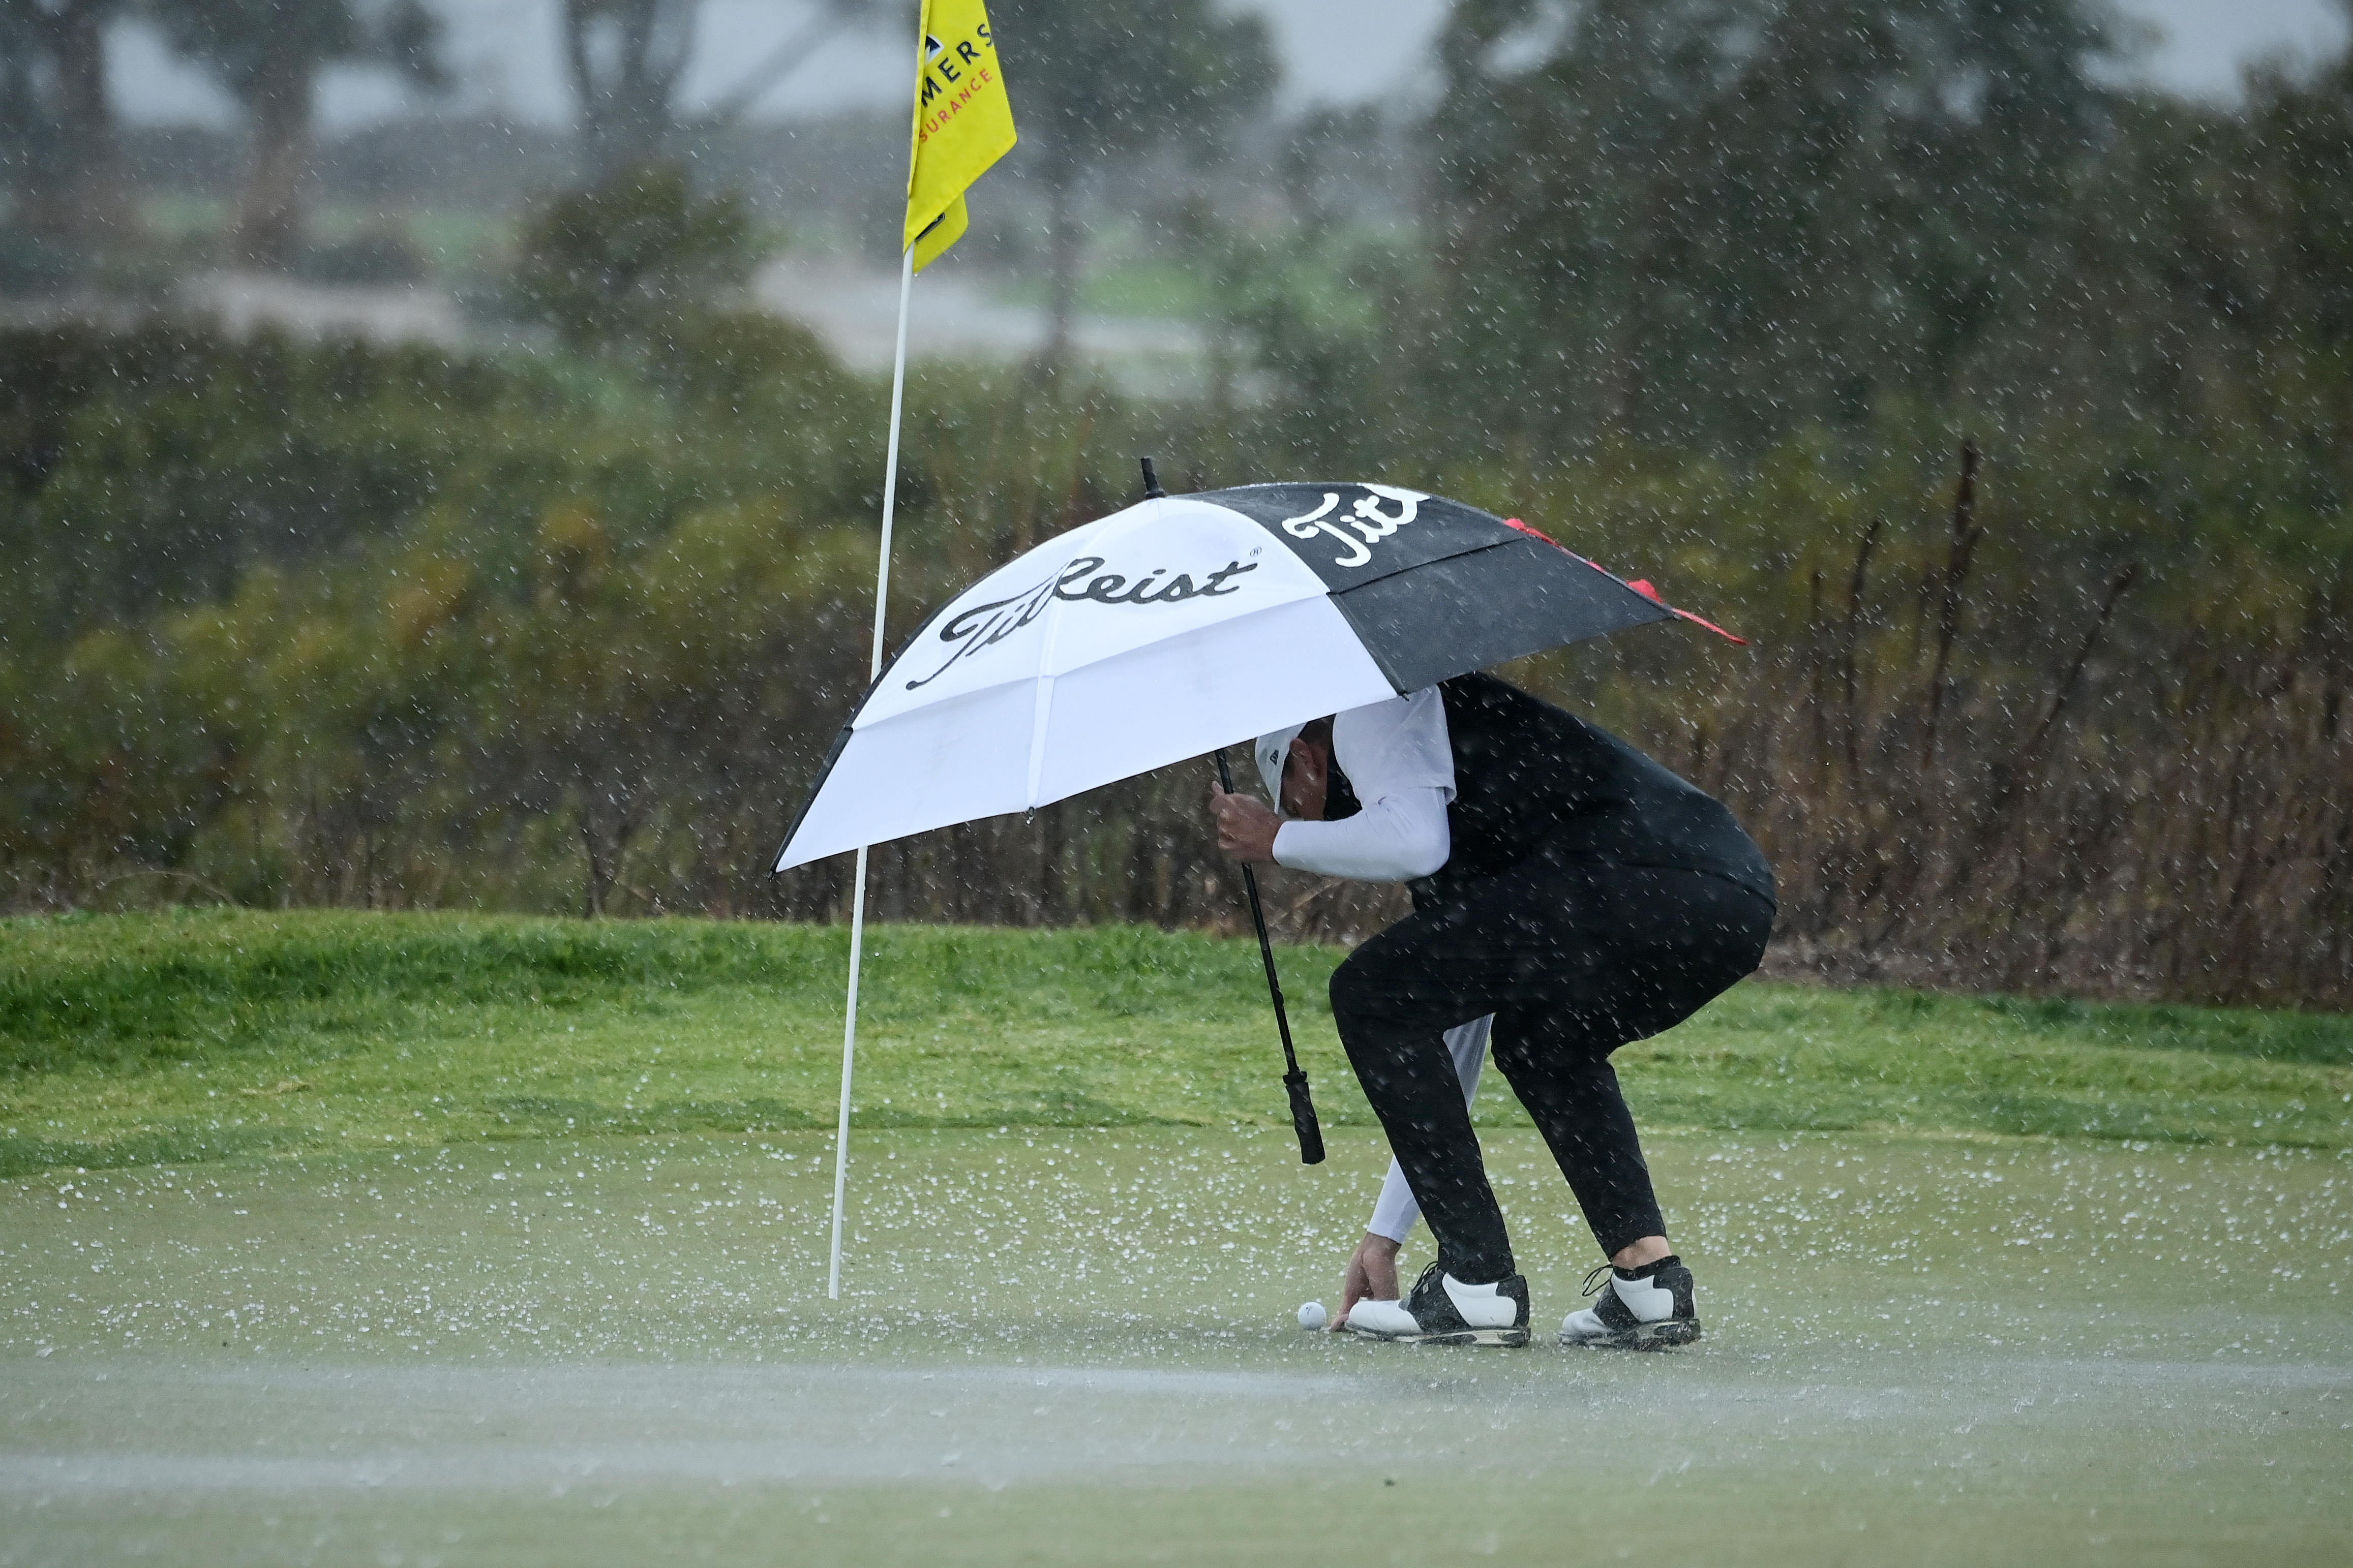 Pros Play Through Wind, Rain and Hail During Round 2 of 2021 Farmers Insurance Open